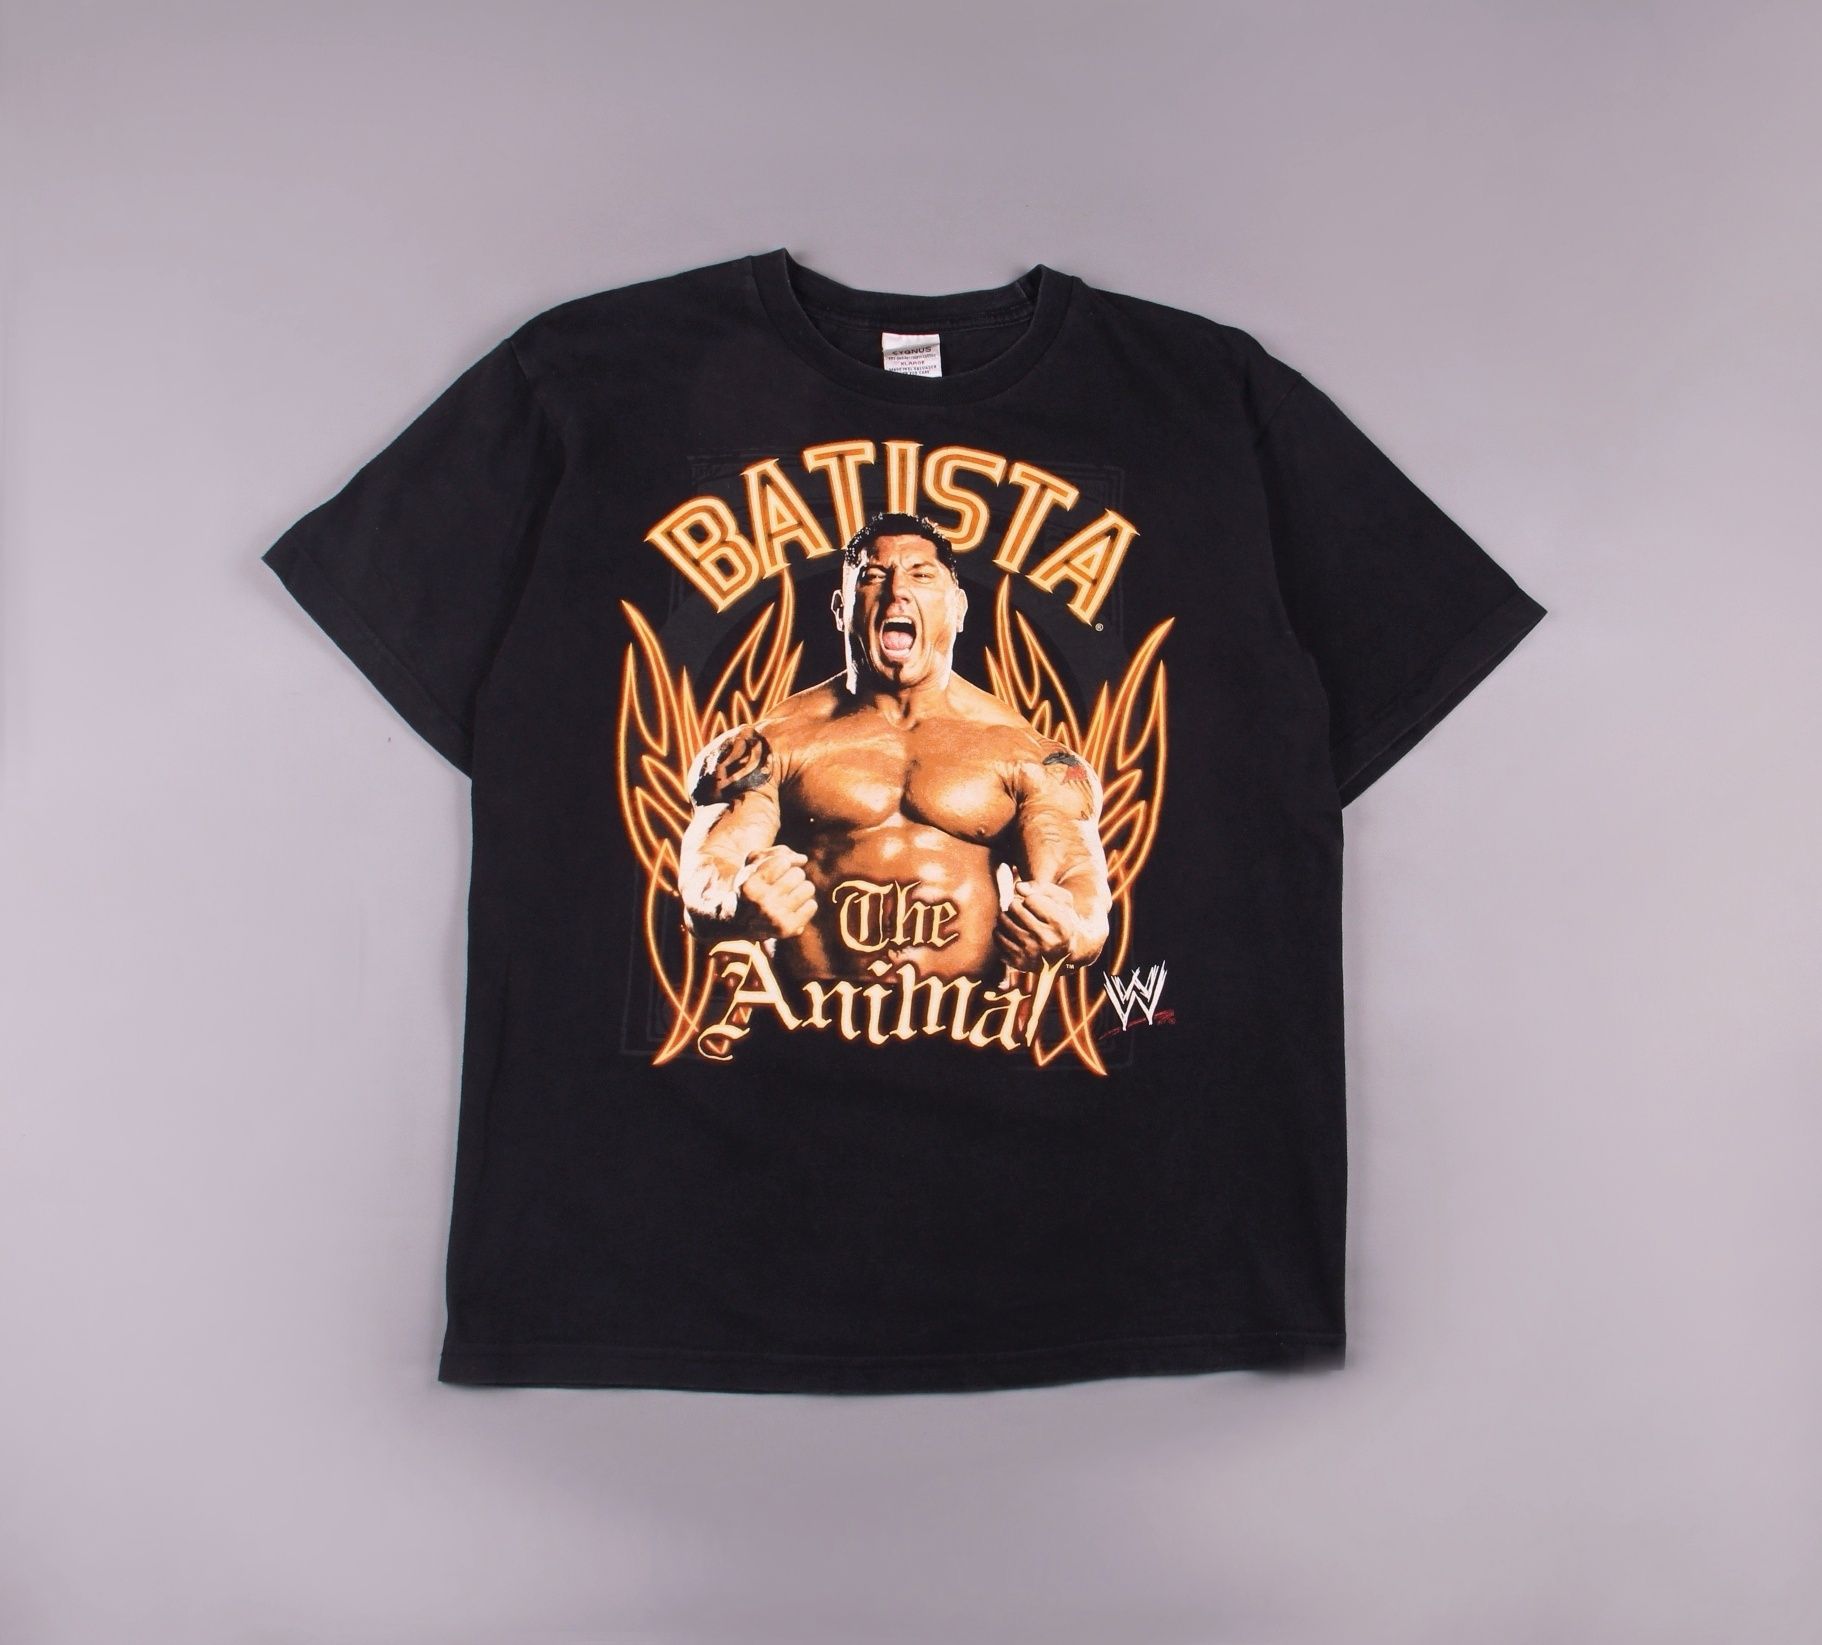 Vintage Vintage WWE Batista The Animal Tee T-Shirt WWF S Size US S / EU 44-46 / 1 - 1 Preview